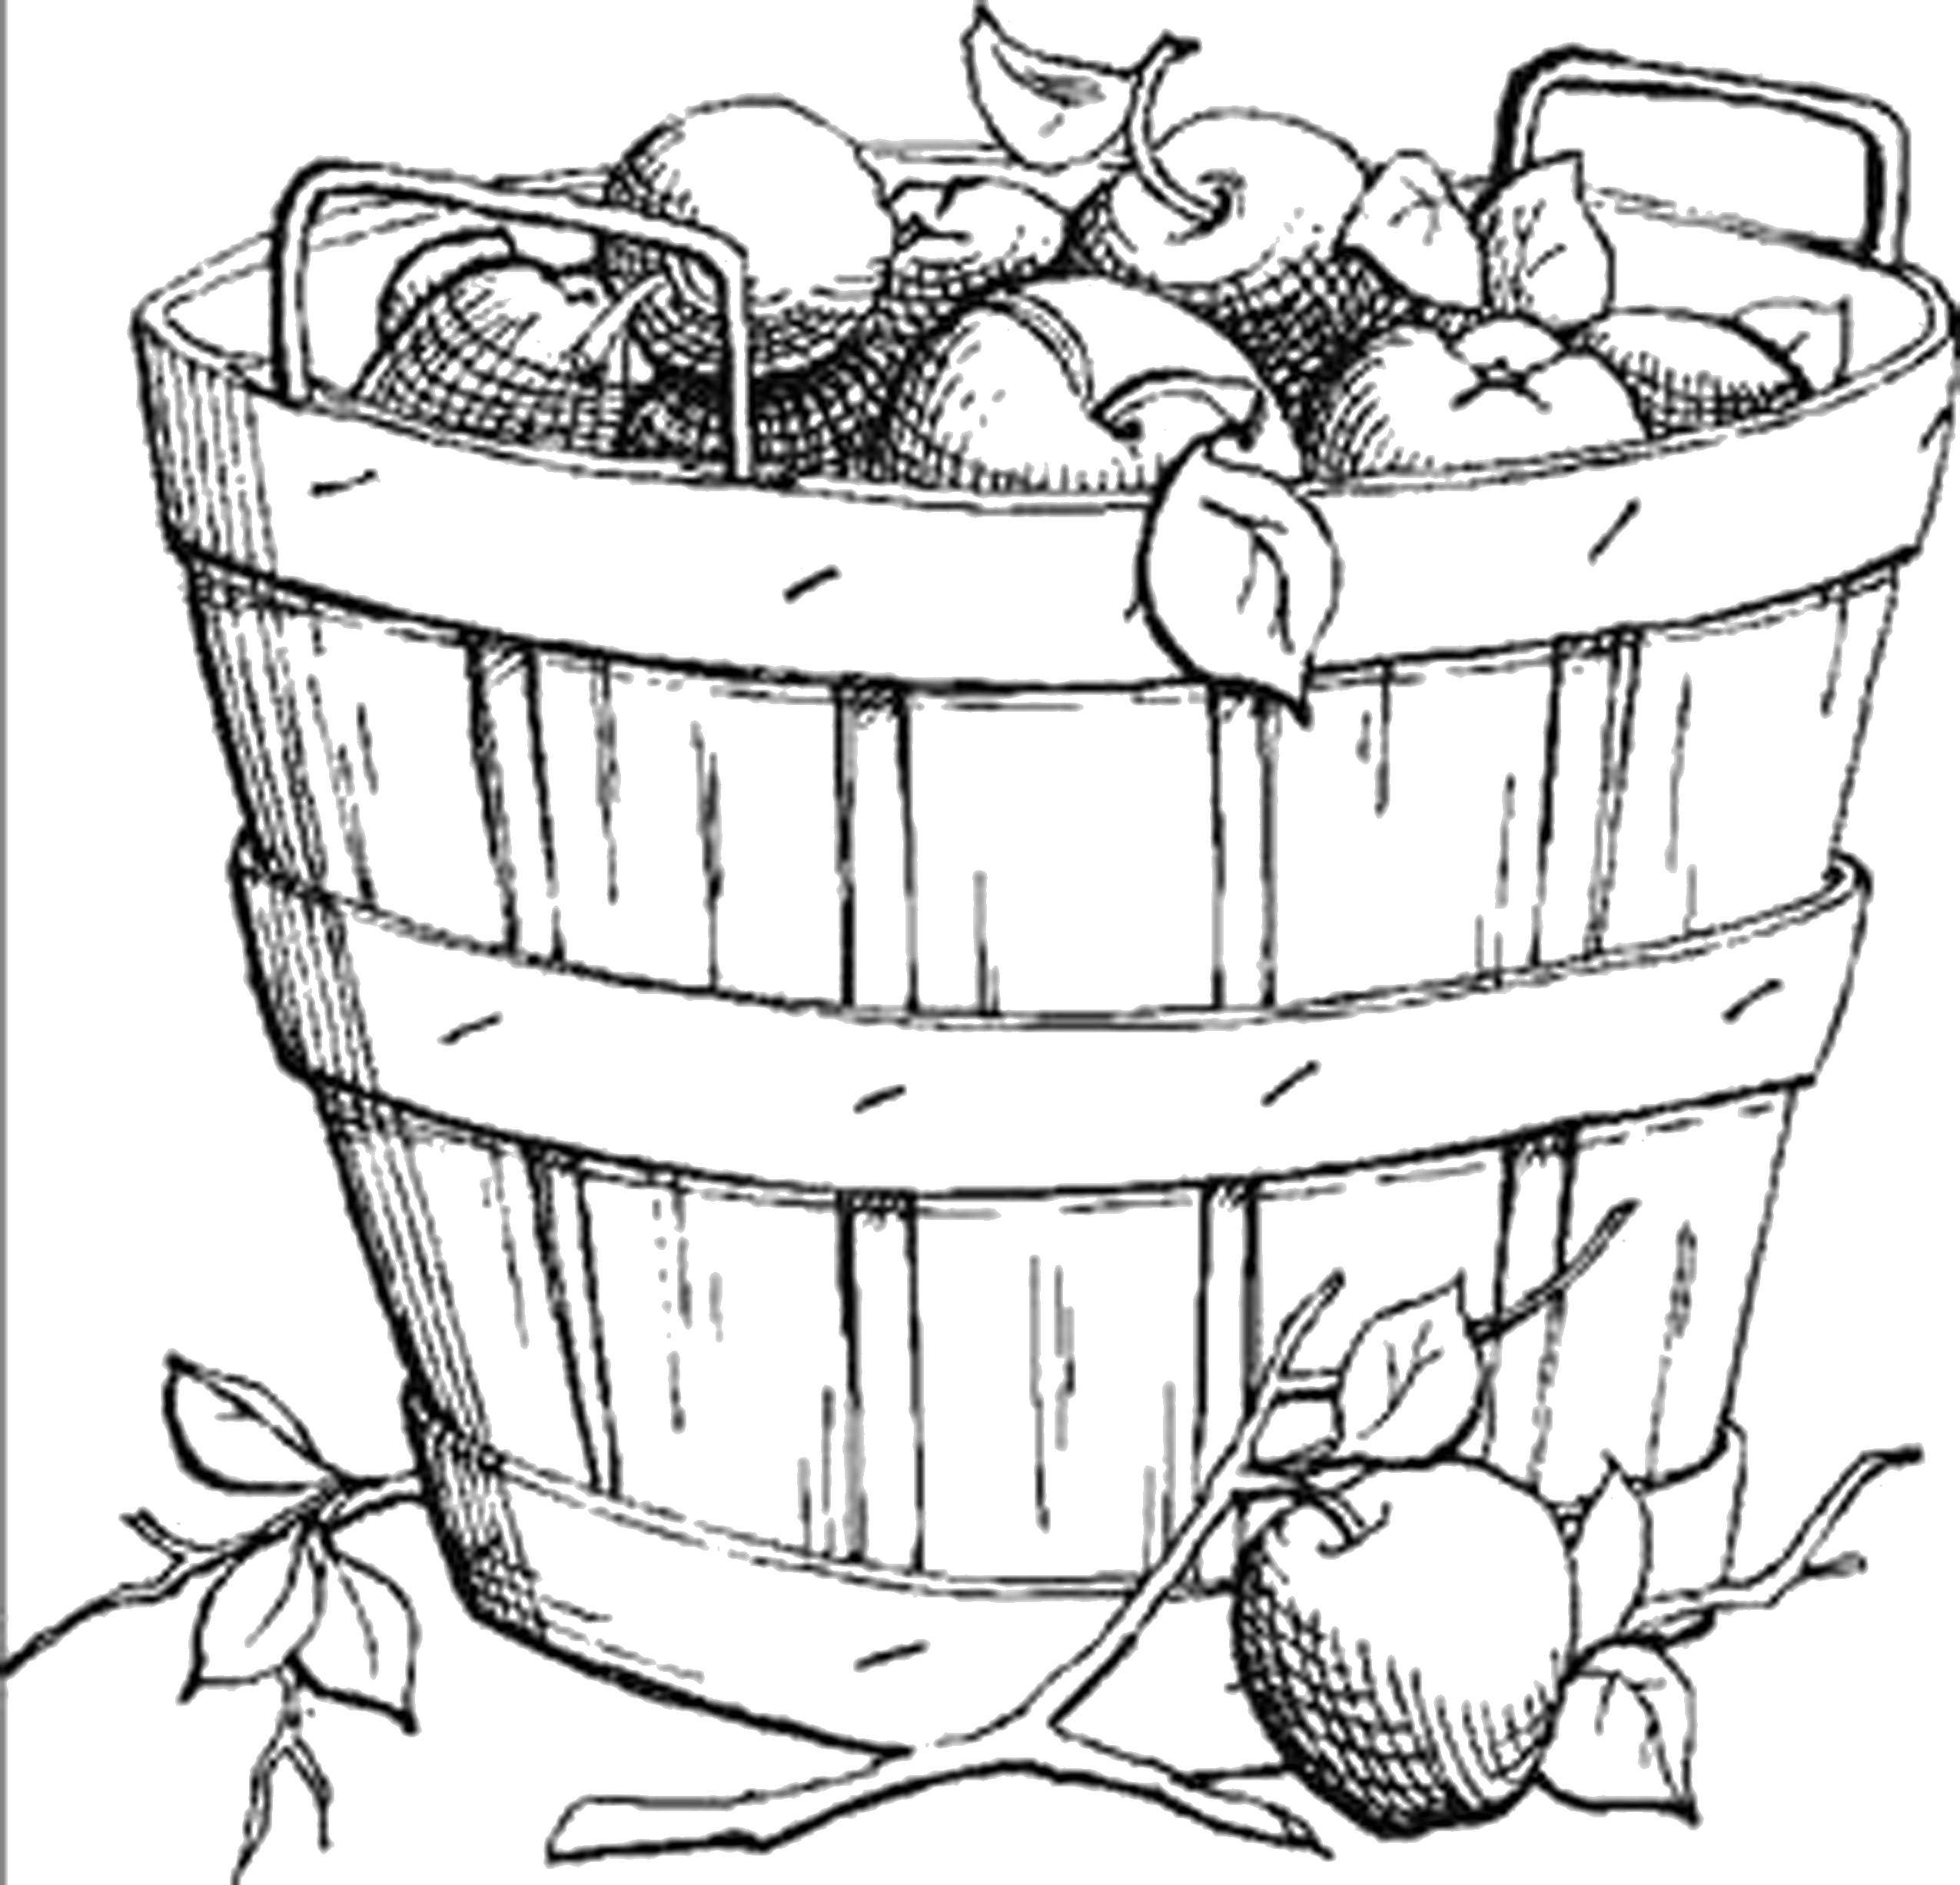 Coloring The bucket of apples. Category fruits. Tags:  fruit, Apple.